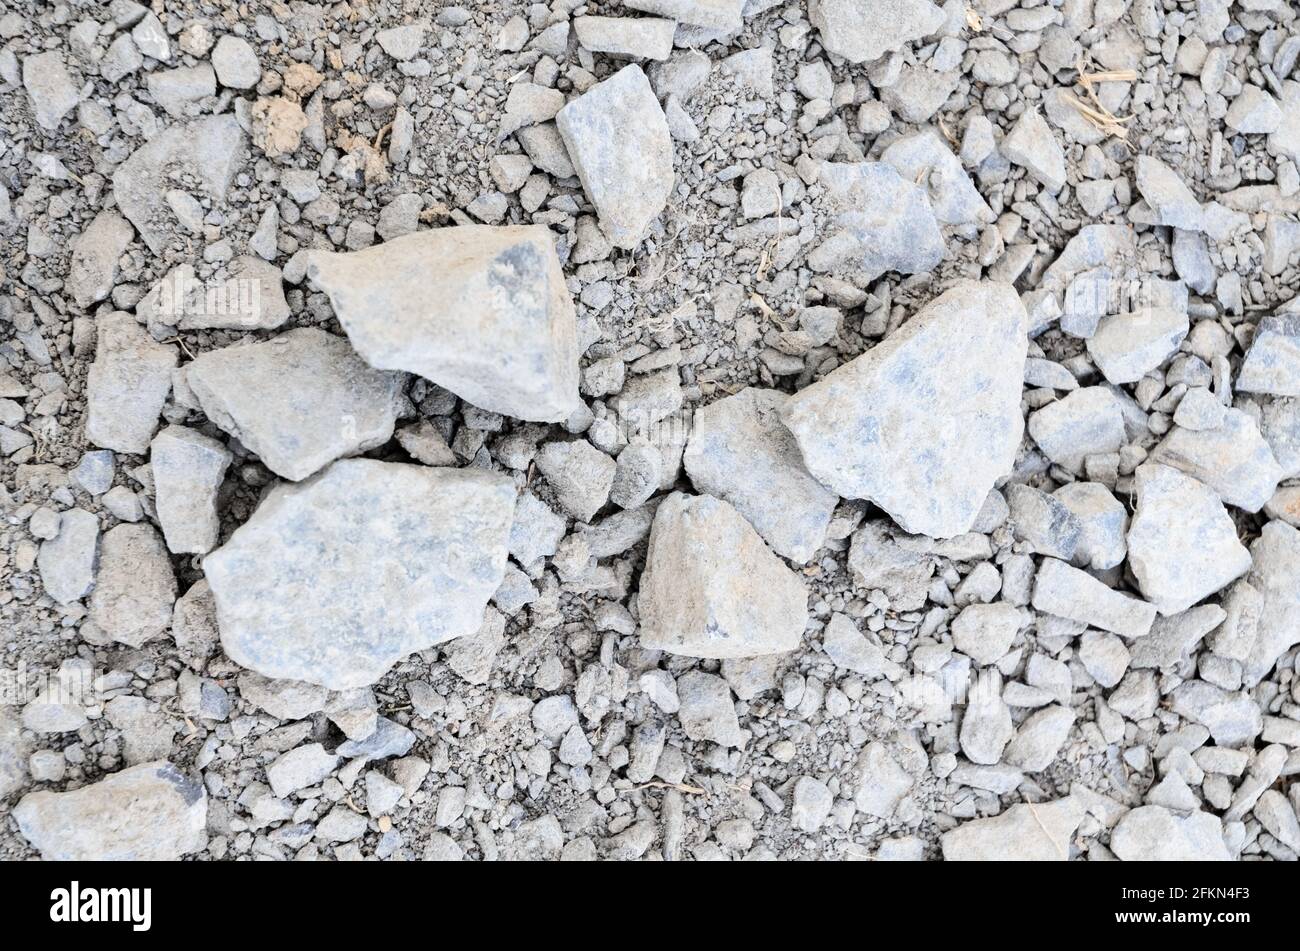 Abstract background with crushed gravel and small little grey rocks and stones, close-up view from directly above Stock Photo